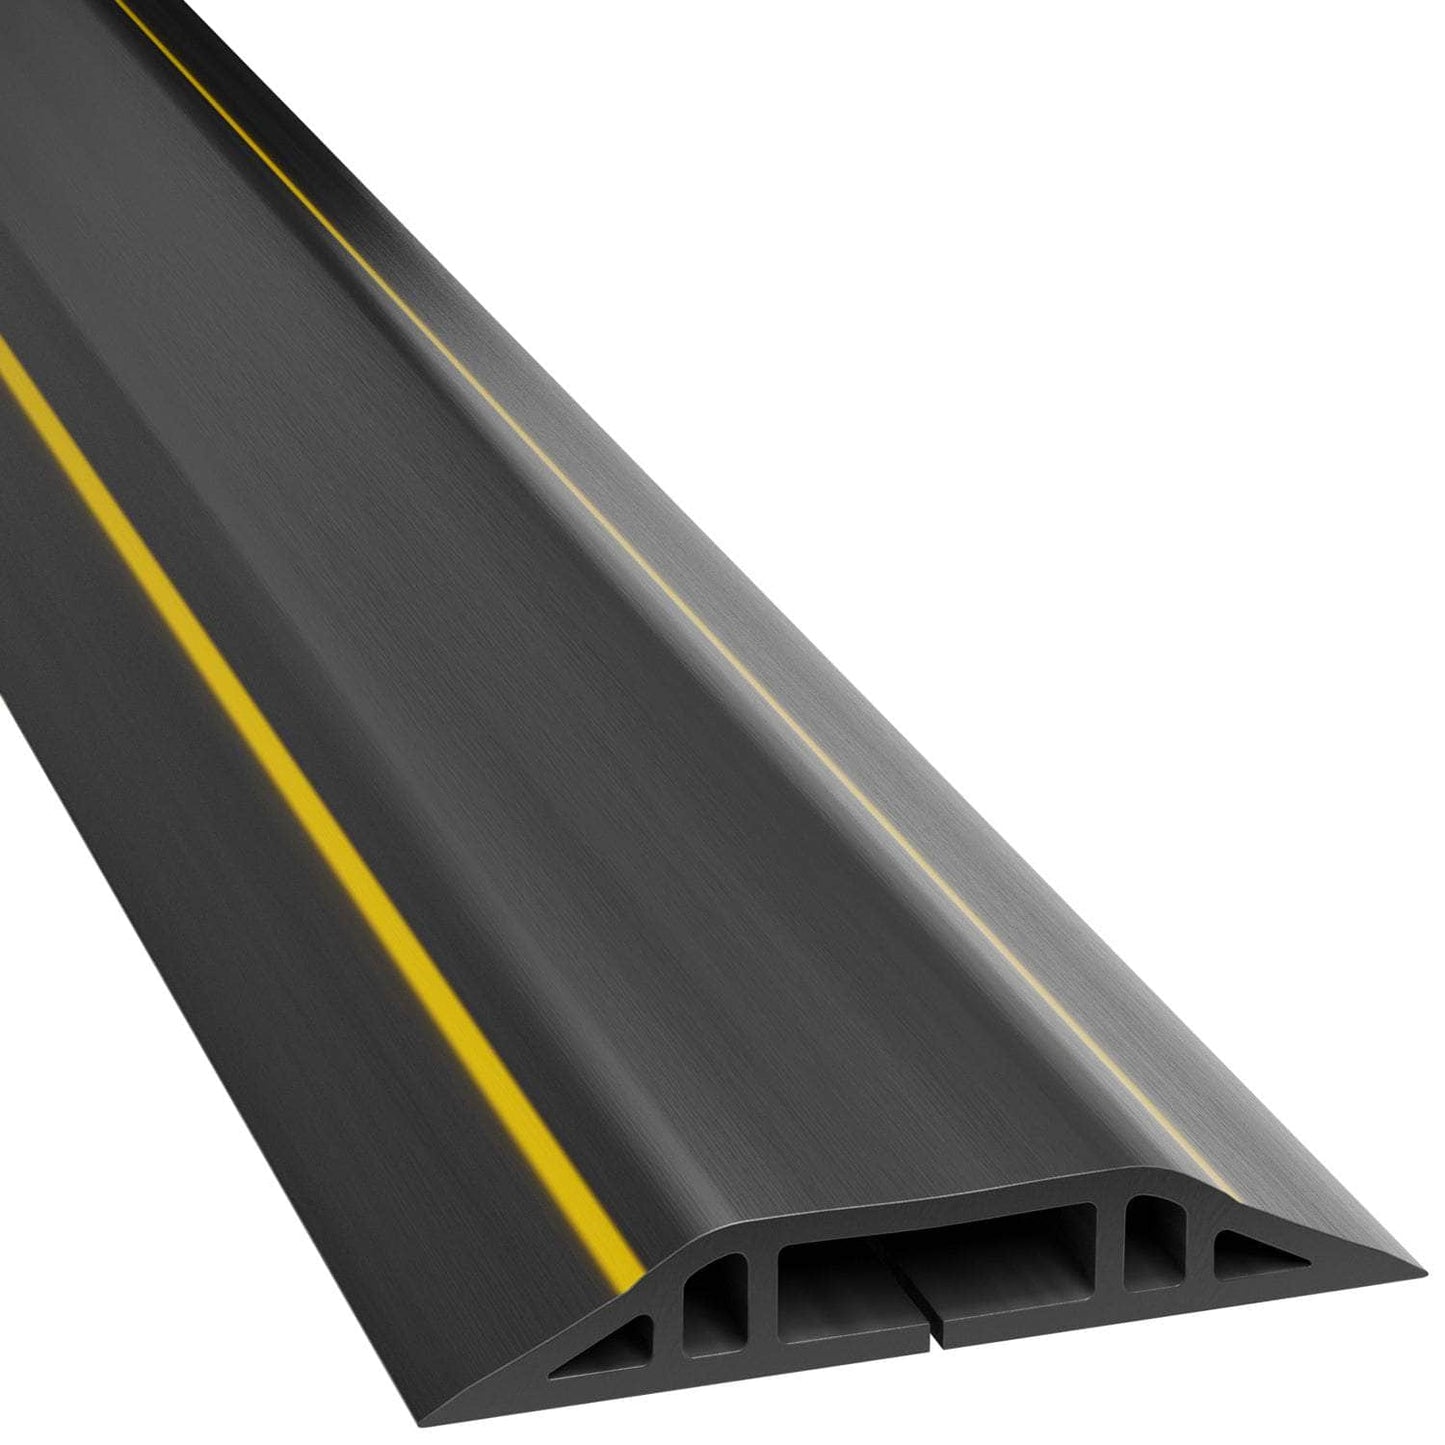 Cable channel/bridge/ramp, floor cable cover for up to 3 cables, black-yellow